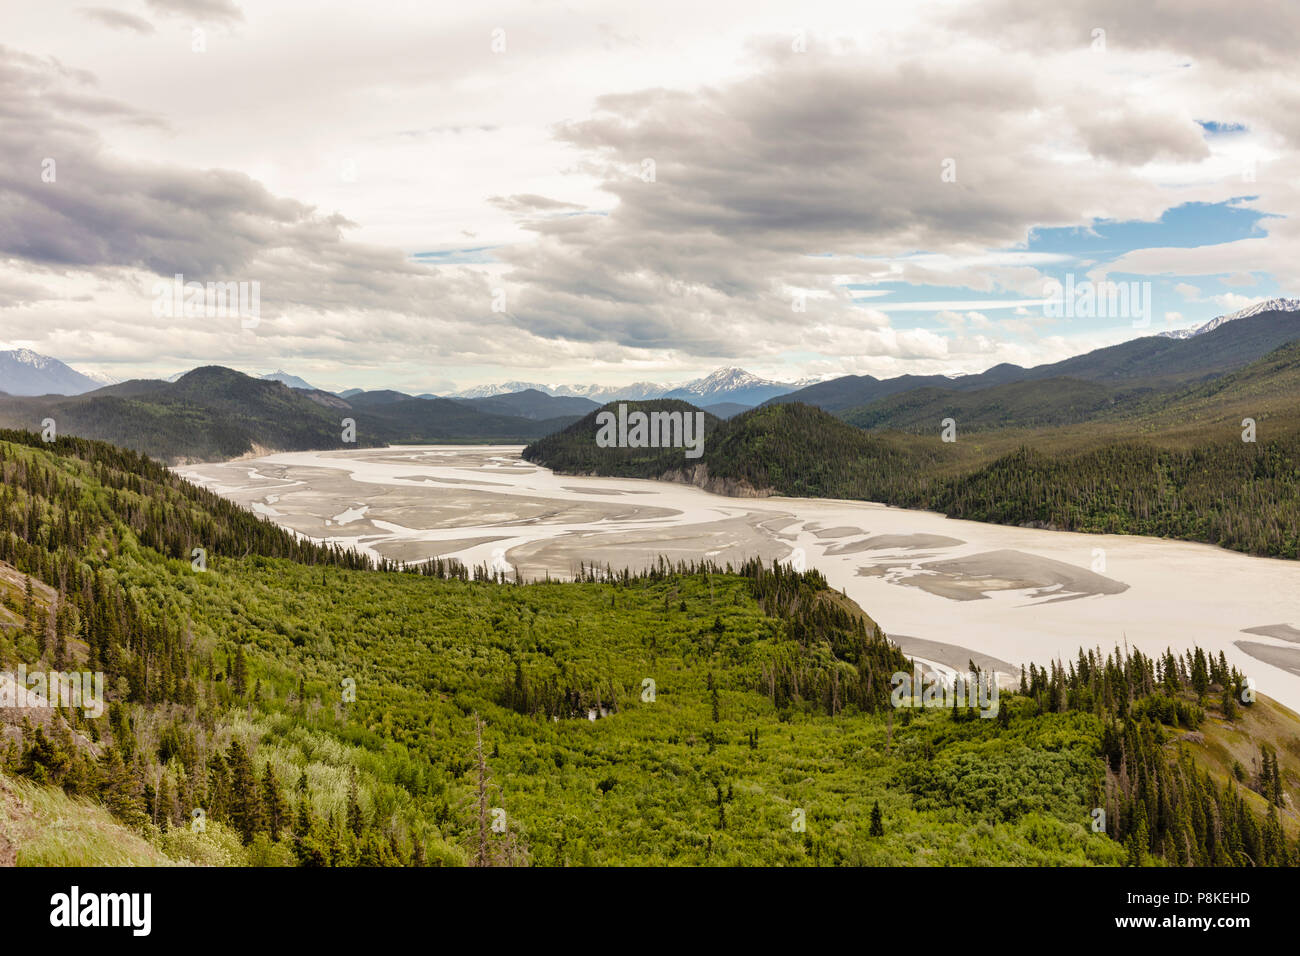 Copper River Valley in Wrangell-St. Elias National Park in Southcentral Alaska. Stock Photo